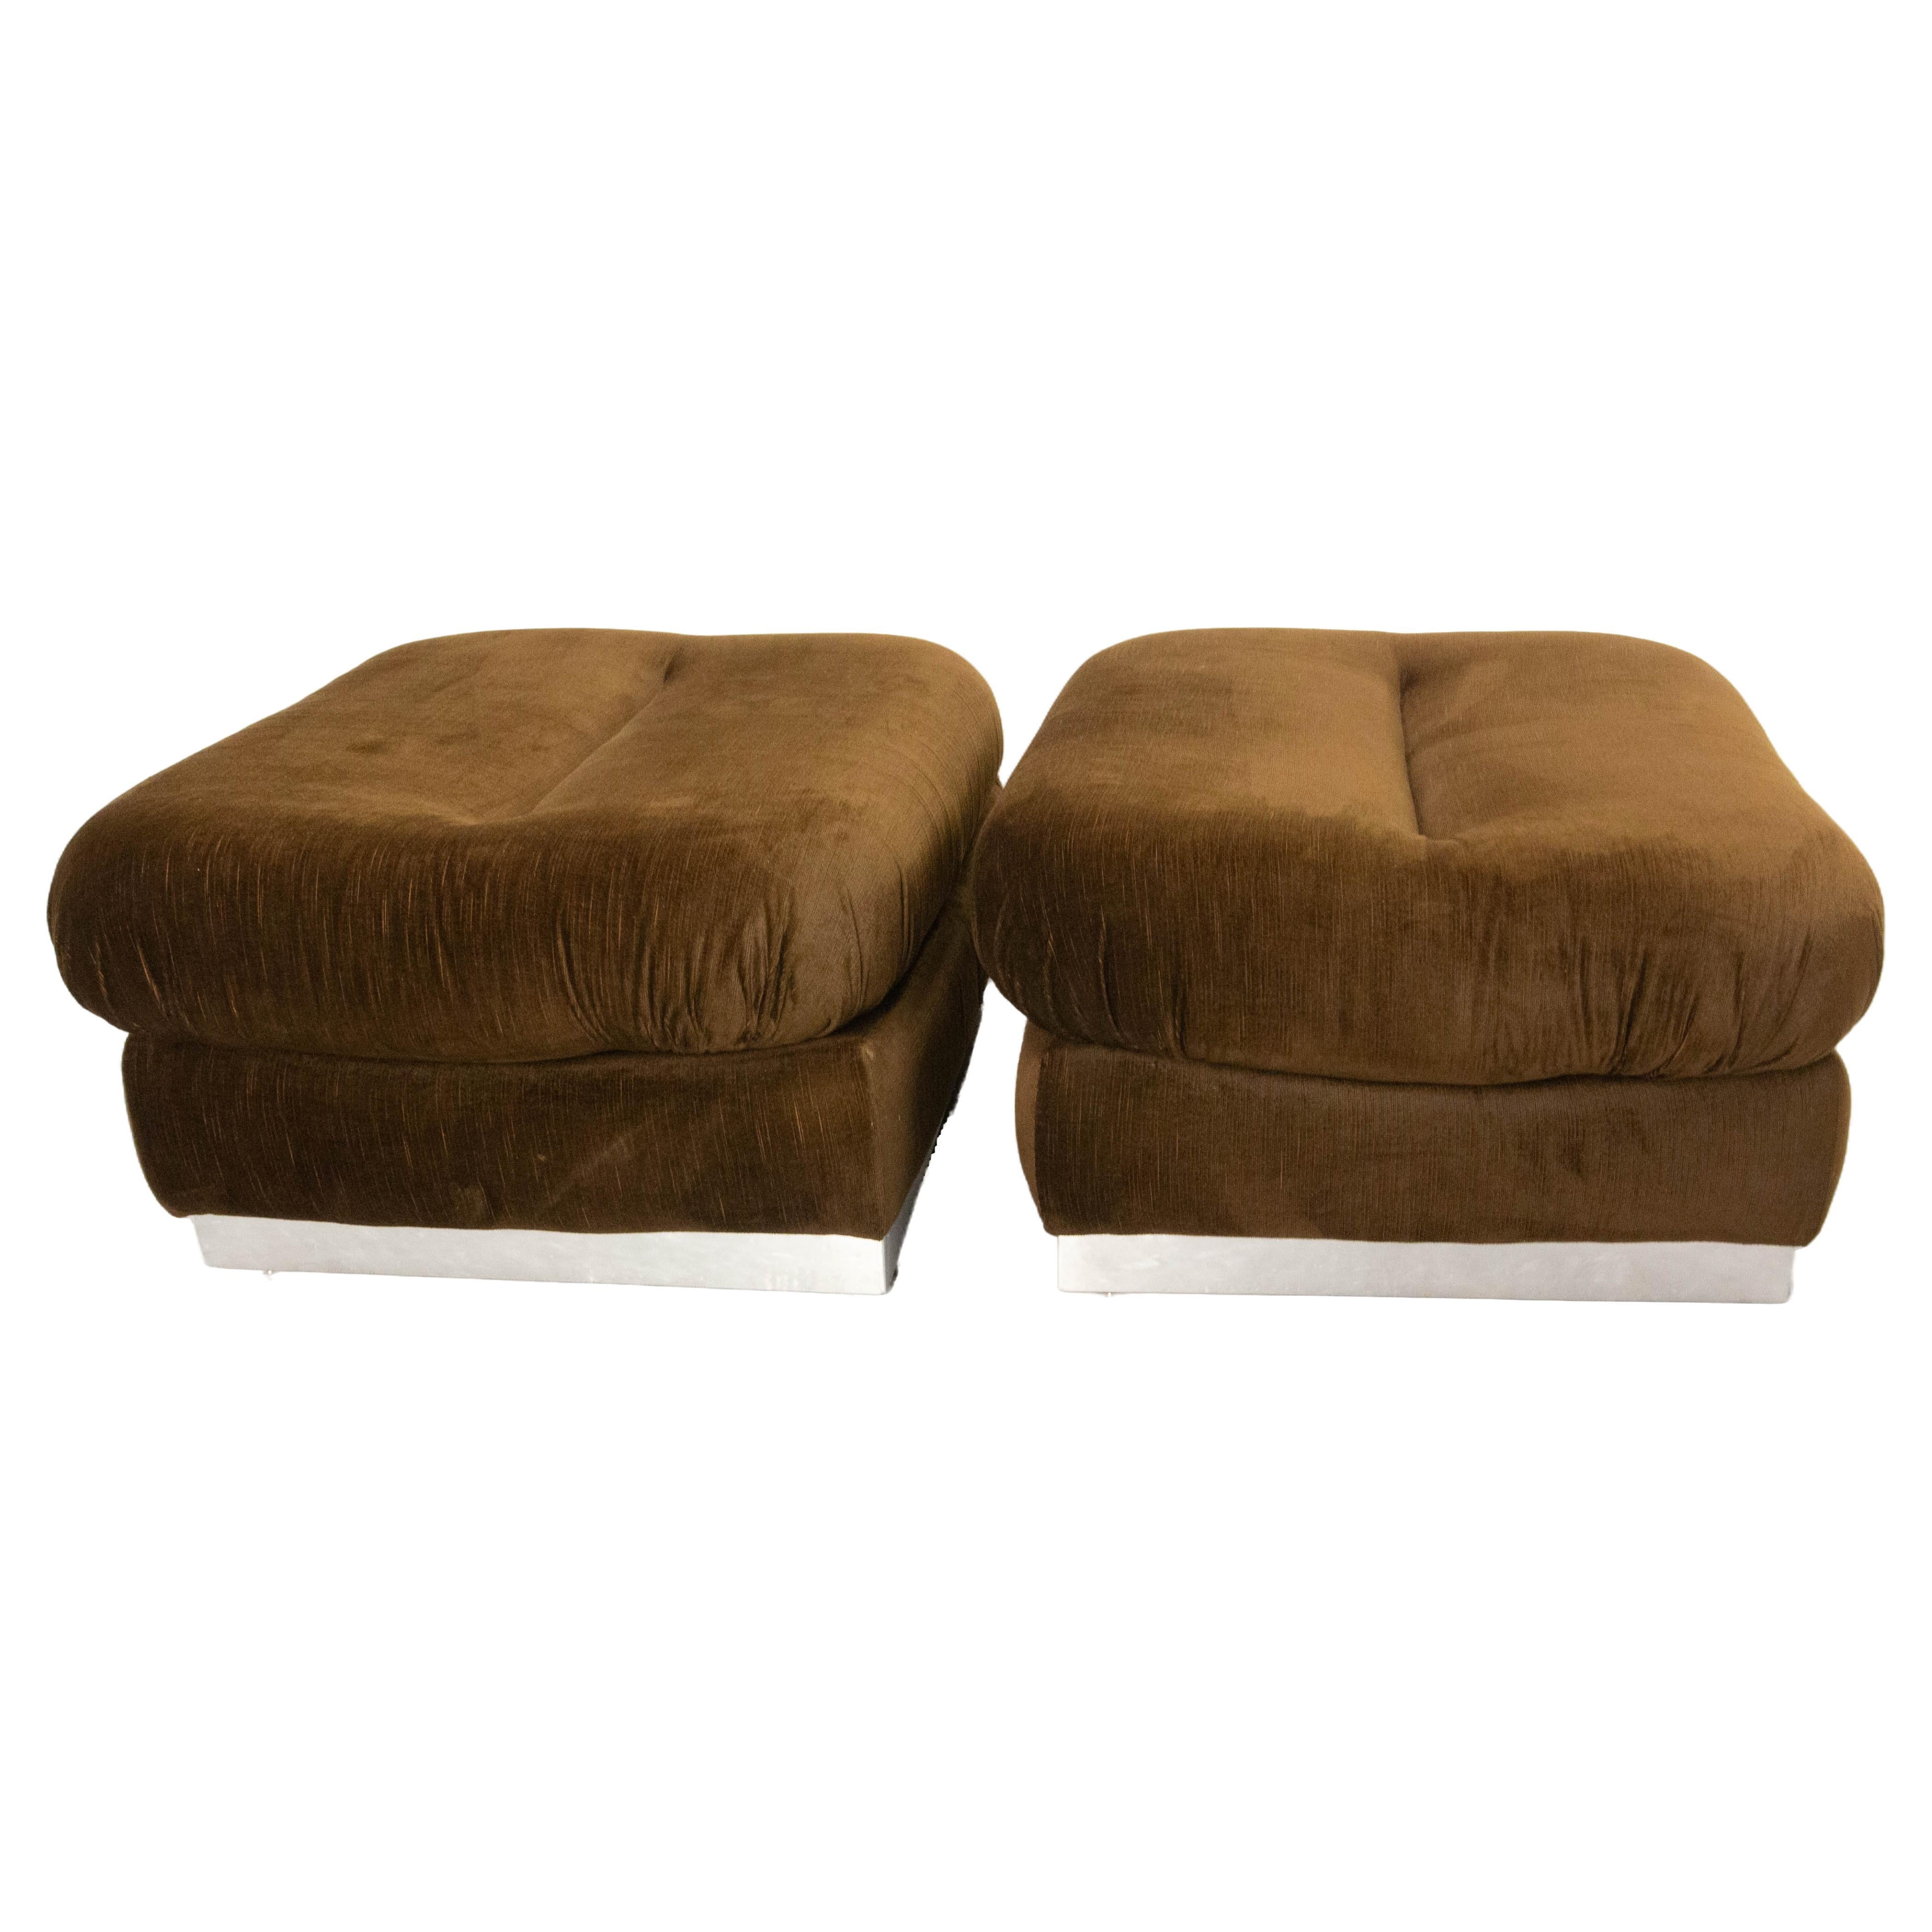 Pair of Pouffe or ottoman, brown velvet and upholstery. The base of the ottomans are made of chipboard wood recovered of chrome.
Can be re-upholstered if you wish.
Good condition
French mid-century

Shipping:
60 / 57 / 80 cm 23 kg.